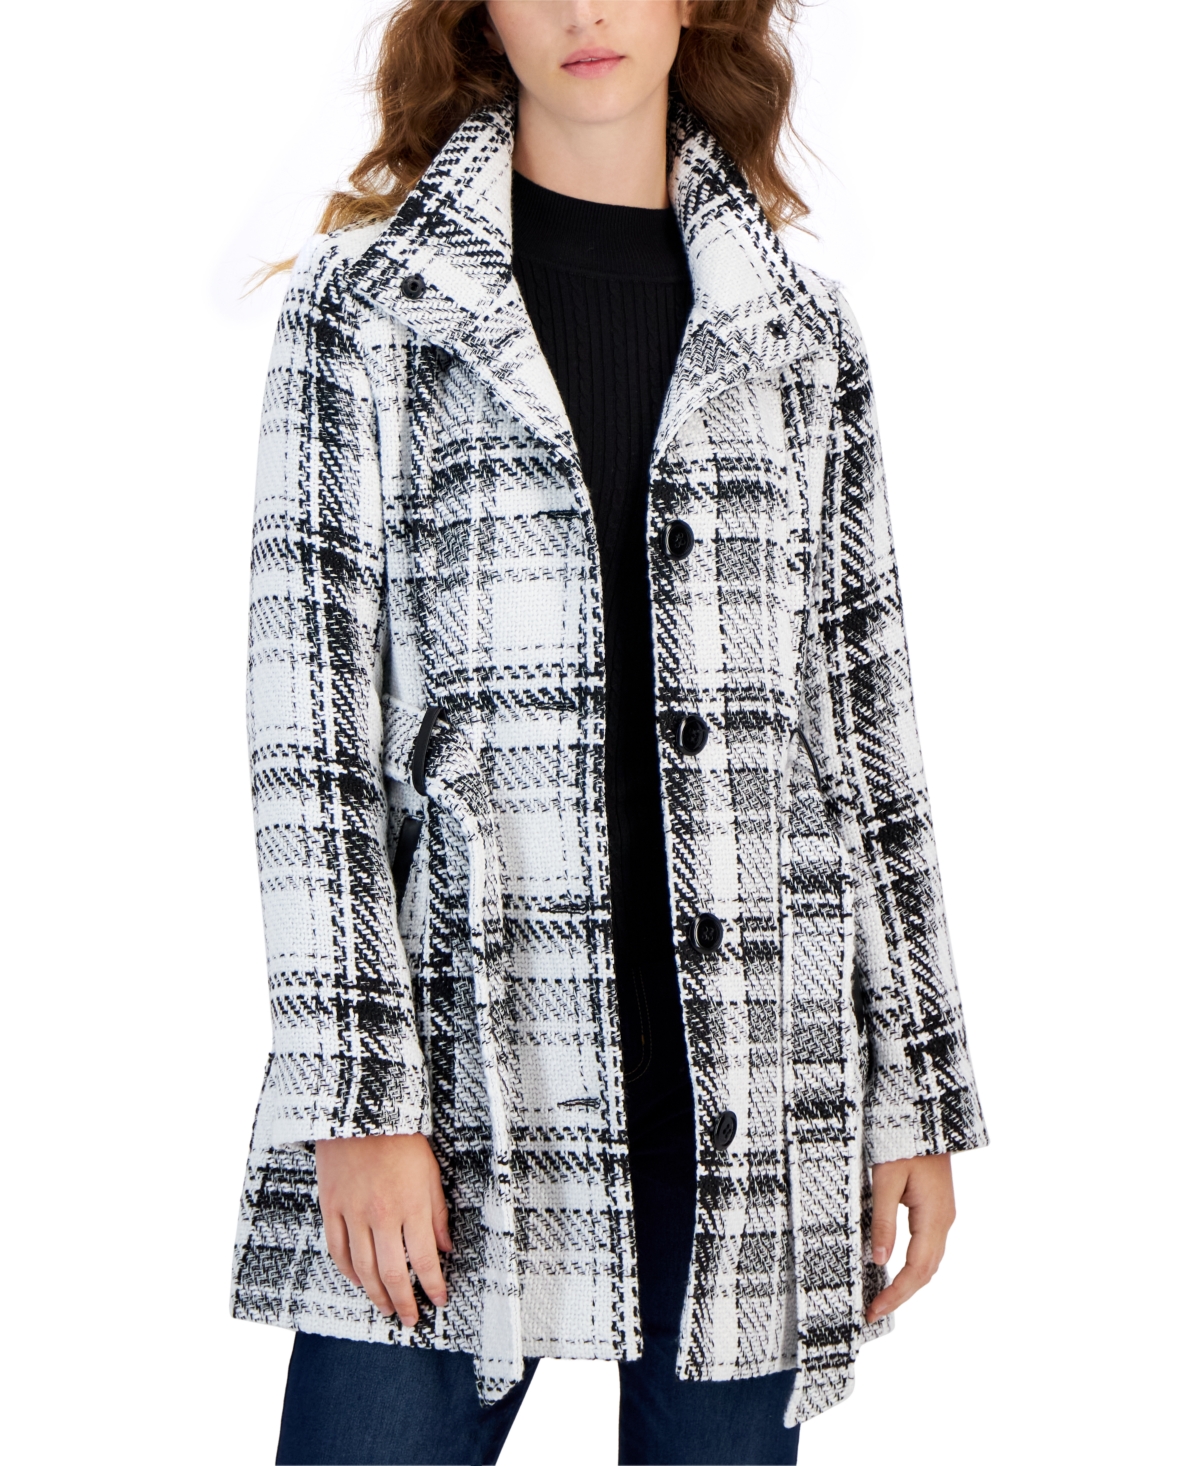 Juniors' Belted Double-Breasted Plaid Long-Sleeve Coat - White/black